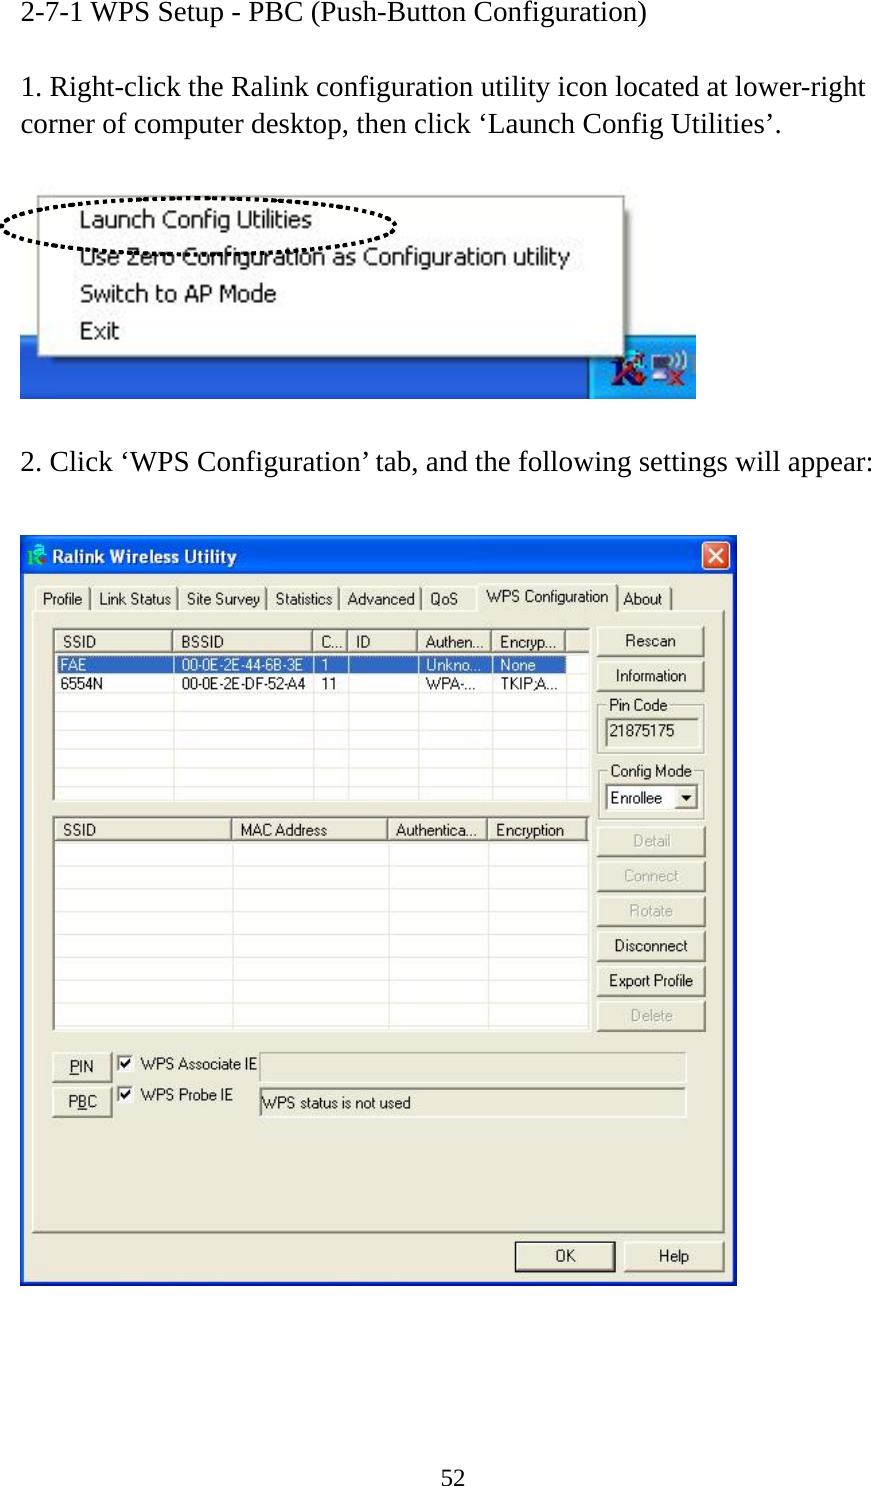  522-7-1 WPS Setup - PBC (Push-Button Configuration)  1. Right-click the Ralink configuration utility icon located at lower-right corner of computer desktop, then click ‘Launch Config Utilities’.    2. Click ‘WPS Configuration’ tab, and the following settings will appear:   